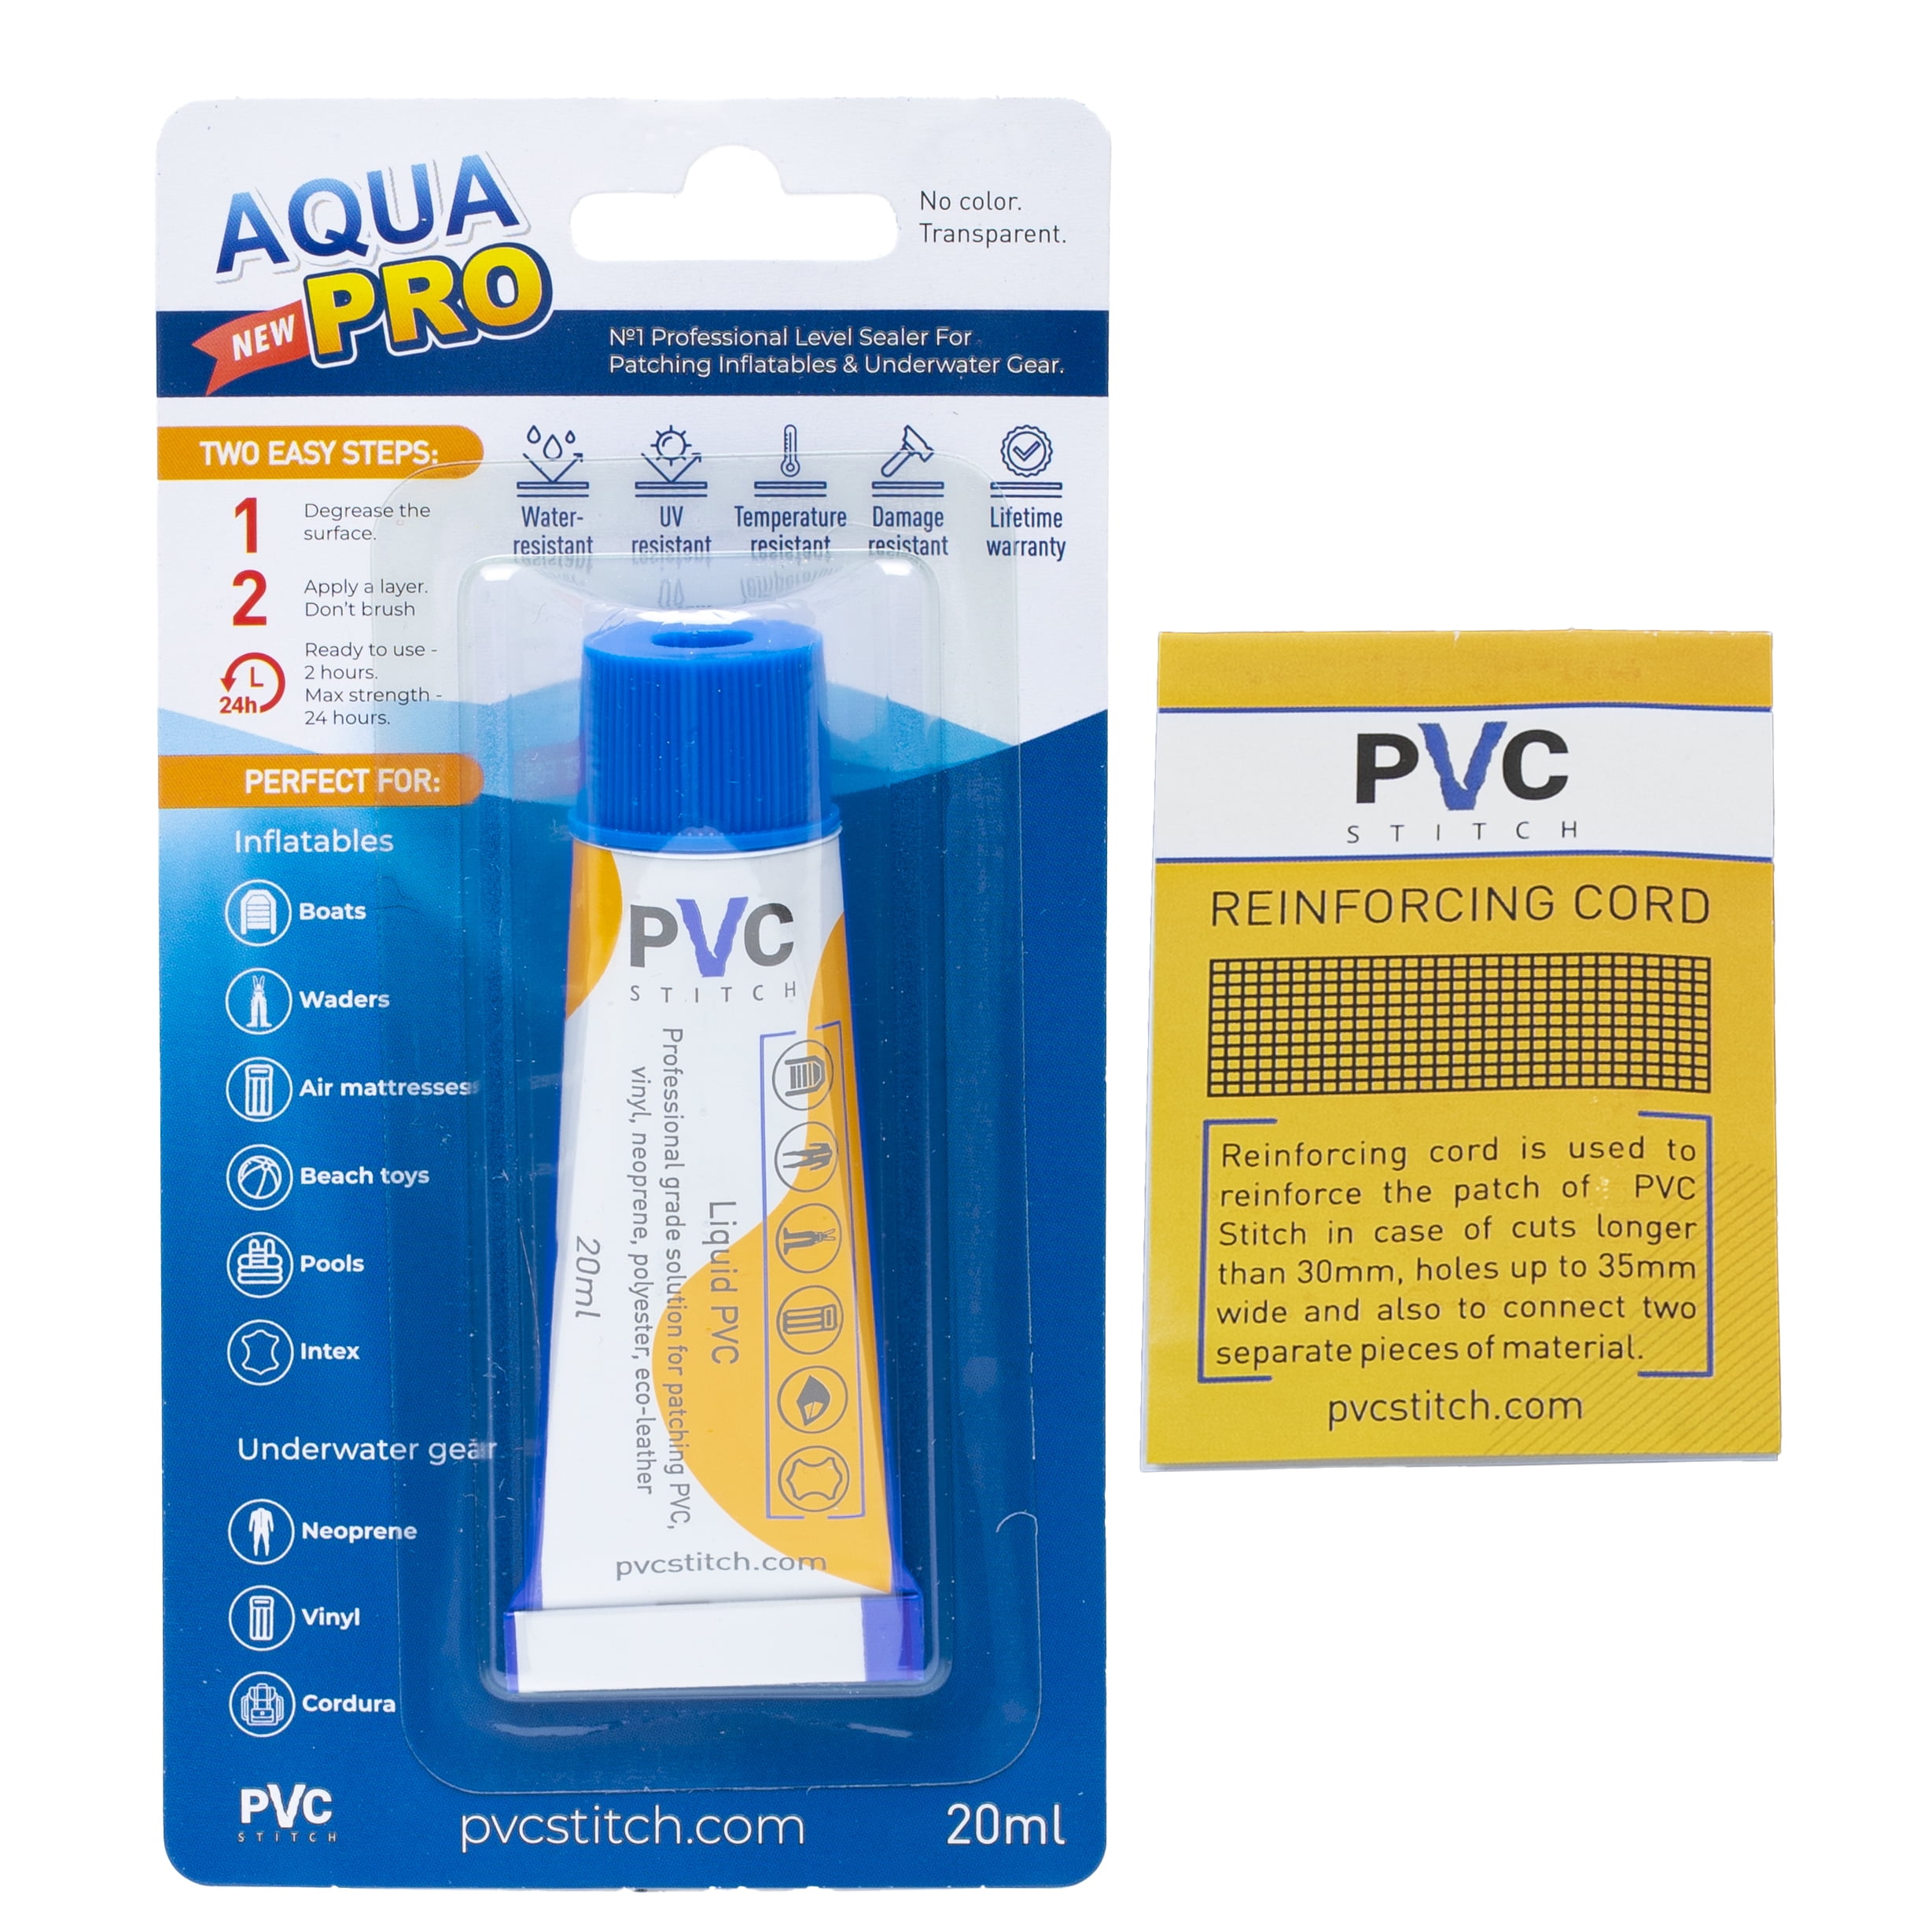 Pool Above Heavy Duty Vinyl Repair Patch Kit for Inflatables Boat Raft Kayak Air Beds, Size: 4 x 10, Blue